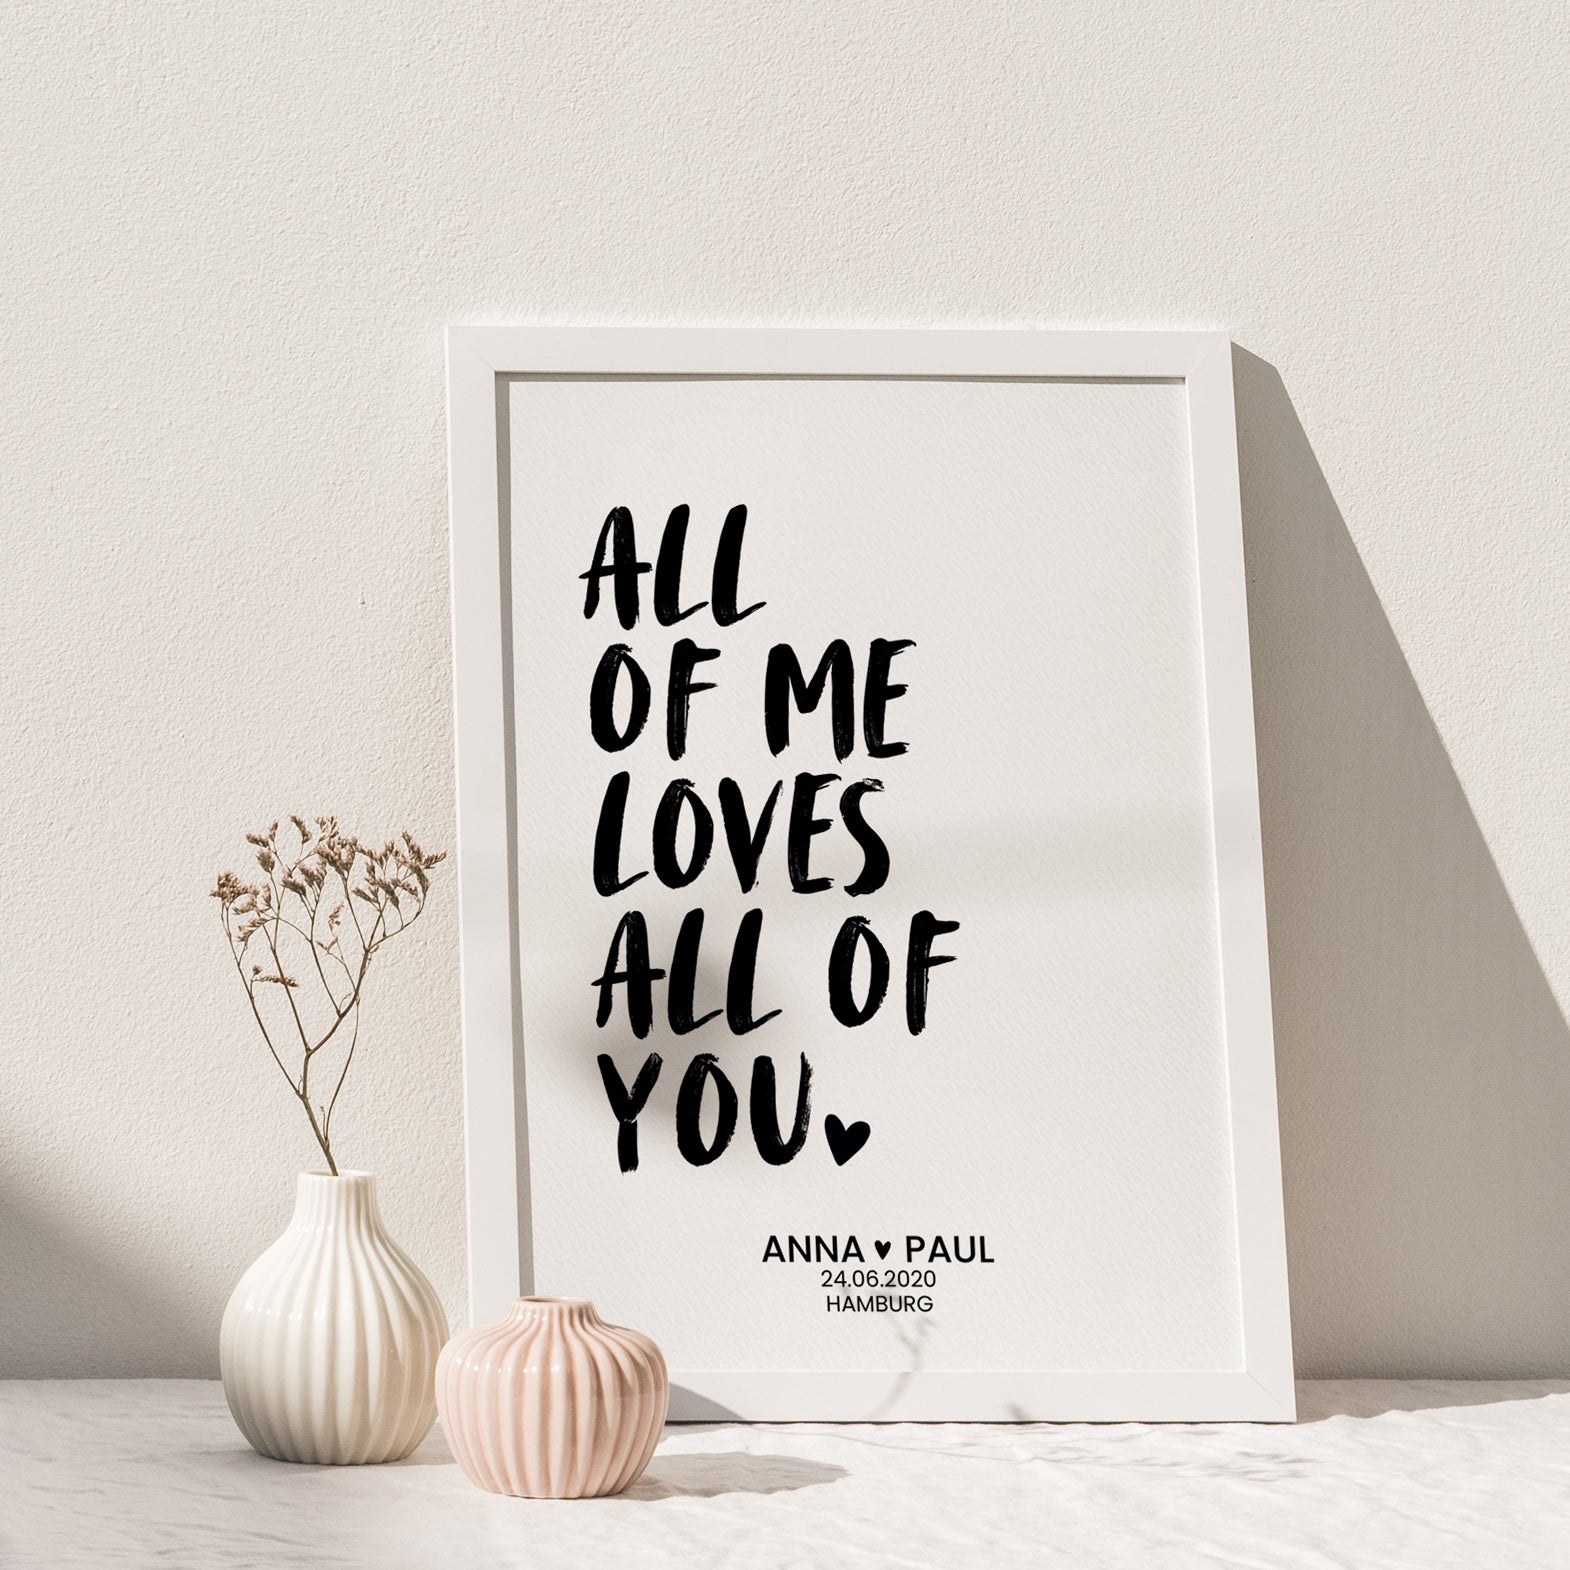 All of me loves all of you - Poster - No. 2